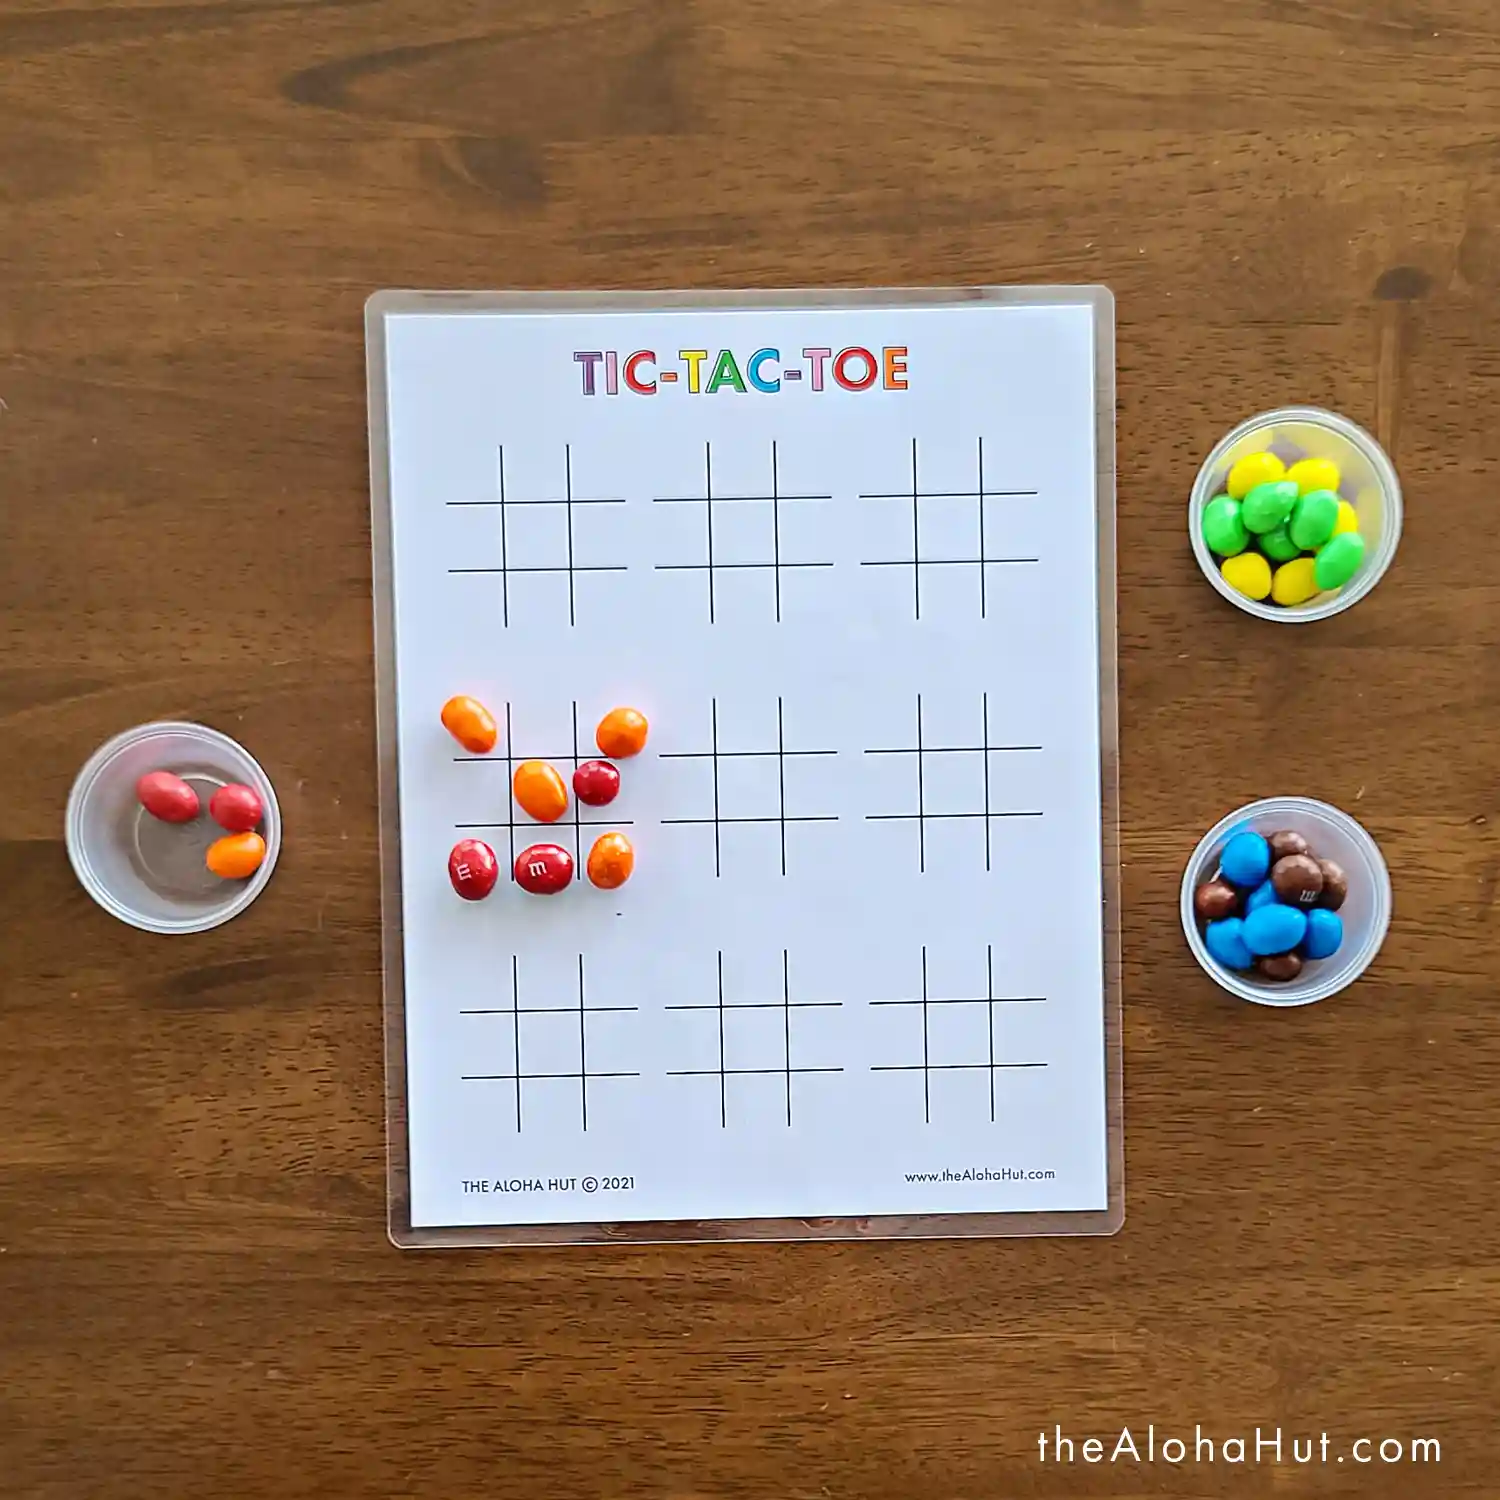 DIY Portable Road Trip Kits - 10 Free Printable Activity Pages - Travel Games - Tic Tac Toe Game